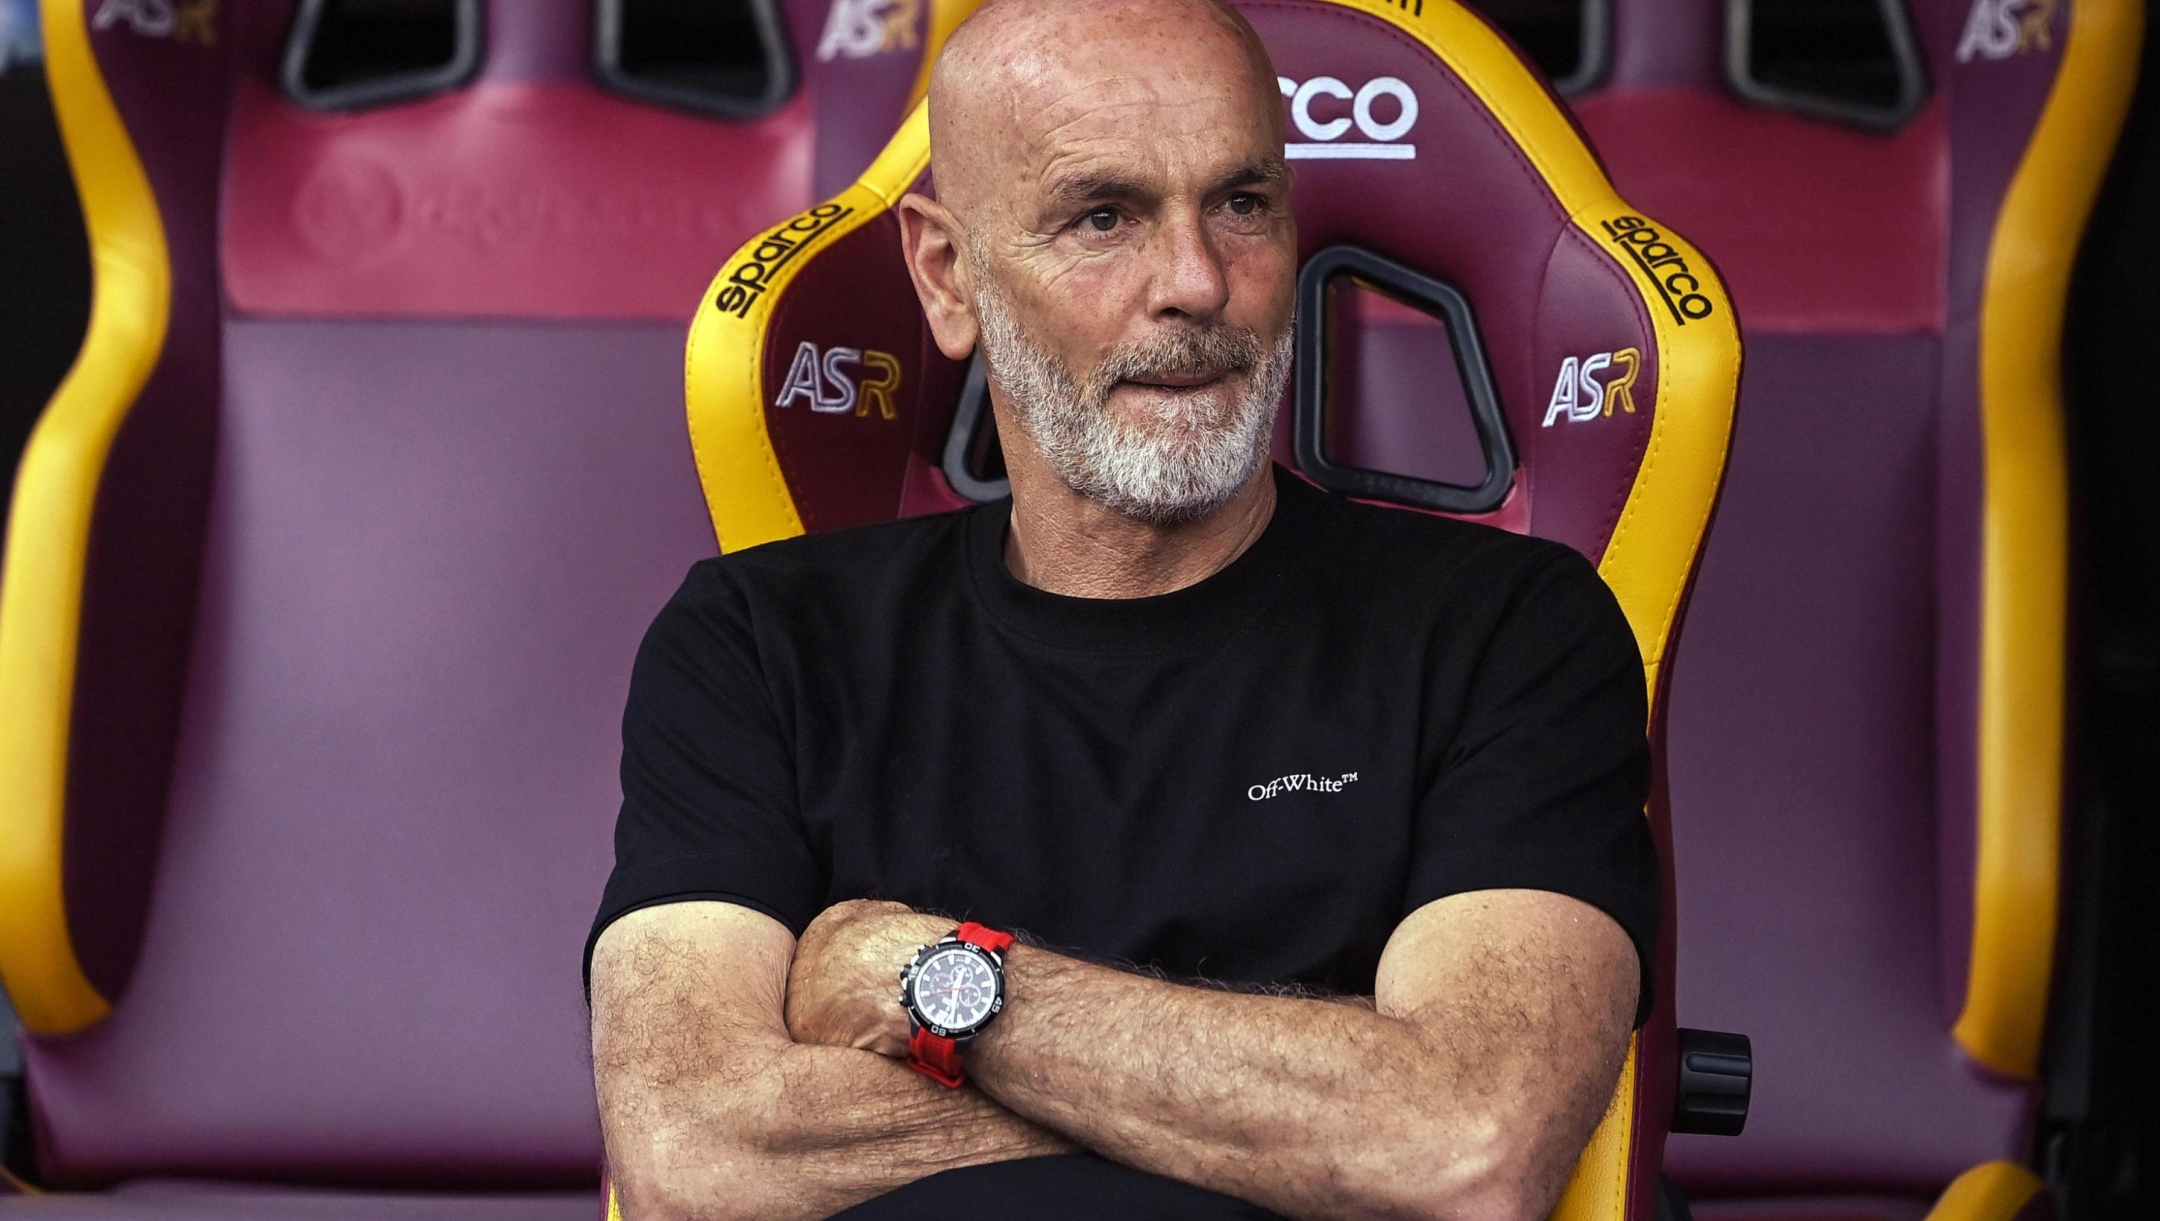 Milan's head coach Stefano Pioli on the bench during the Serie A soccer match between AS Roma and AC Milan at the Olimpico stadium in Rome, Italy, 29 April 2023. ANSA/RICCARDO ANTIMIANI